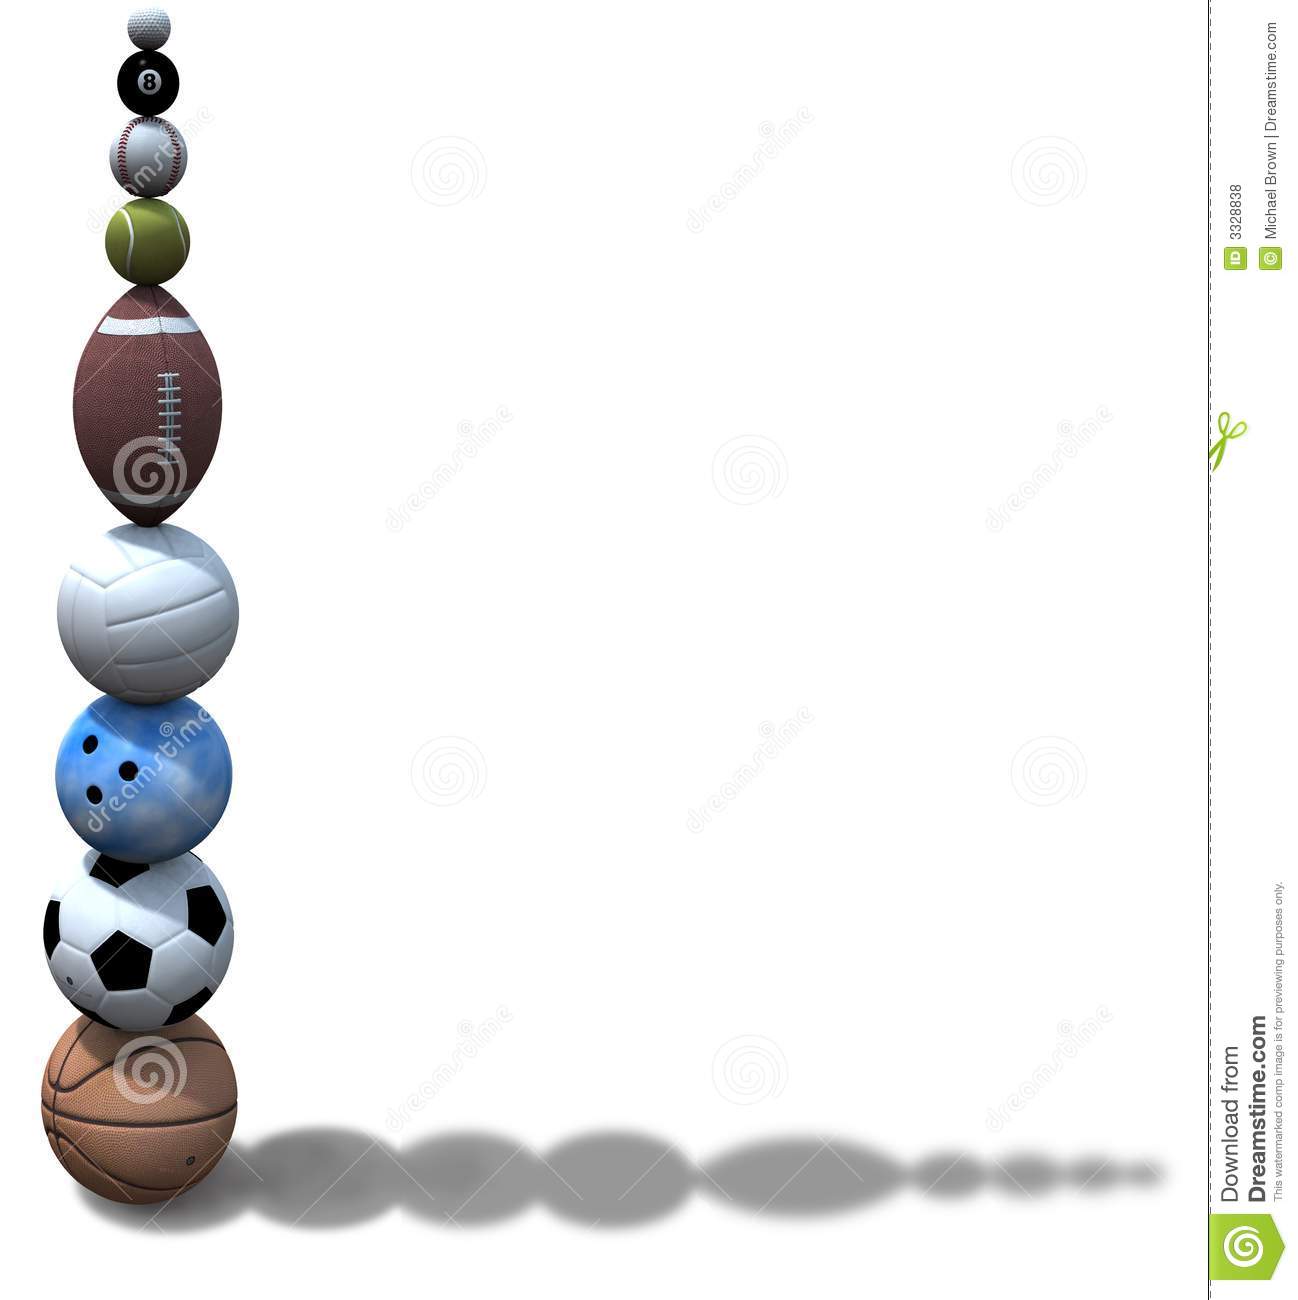 Sports Ball Stack Background Royalty Free Stock Photos   Image